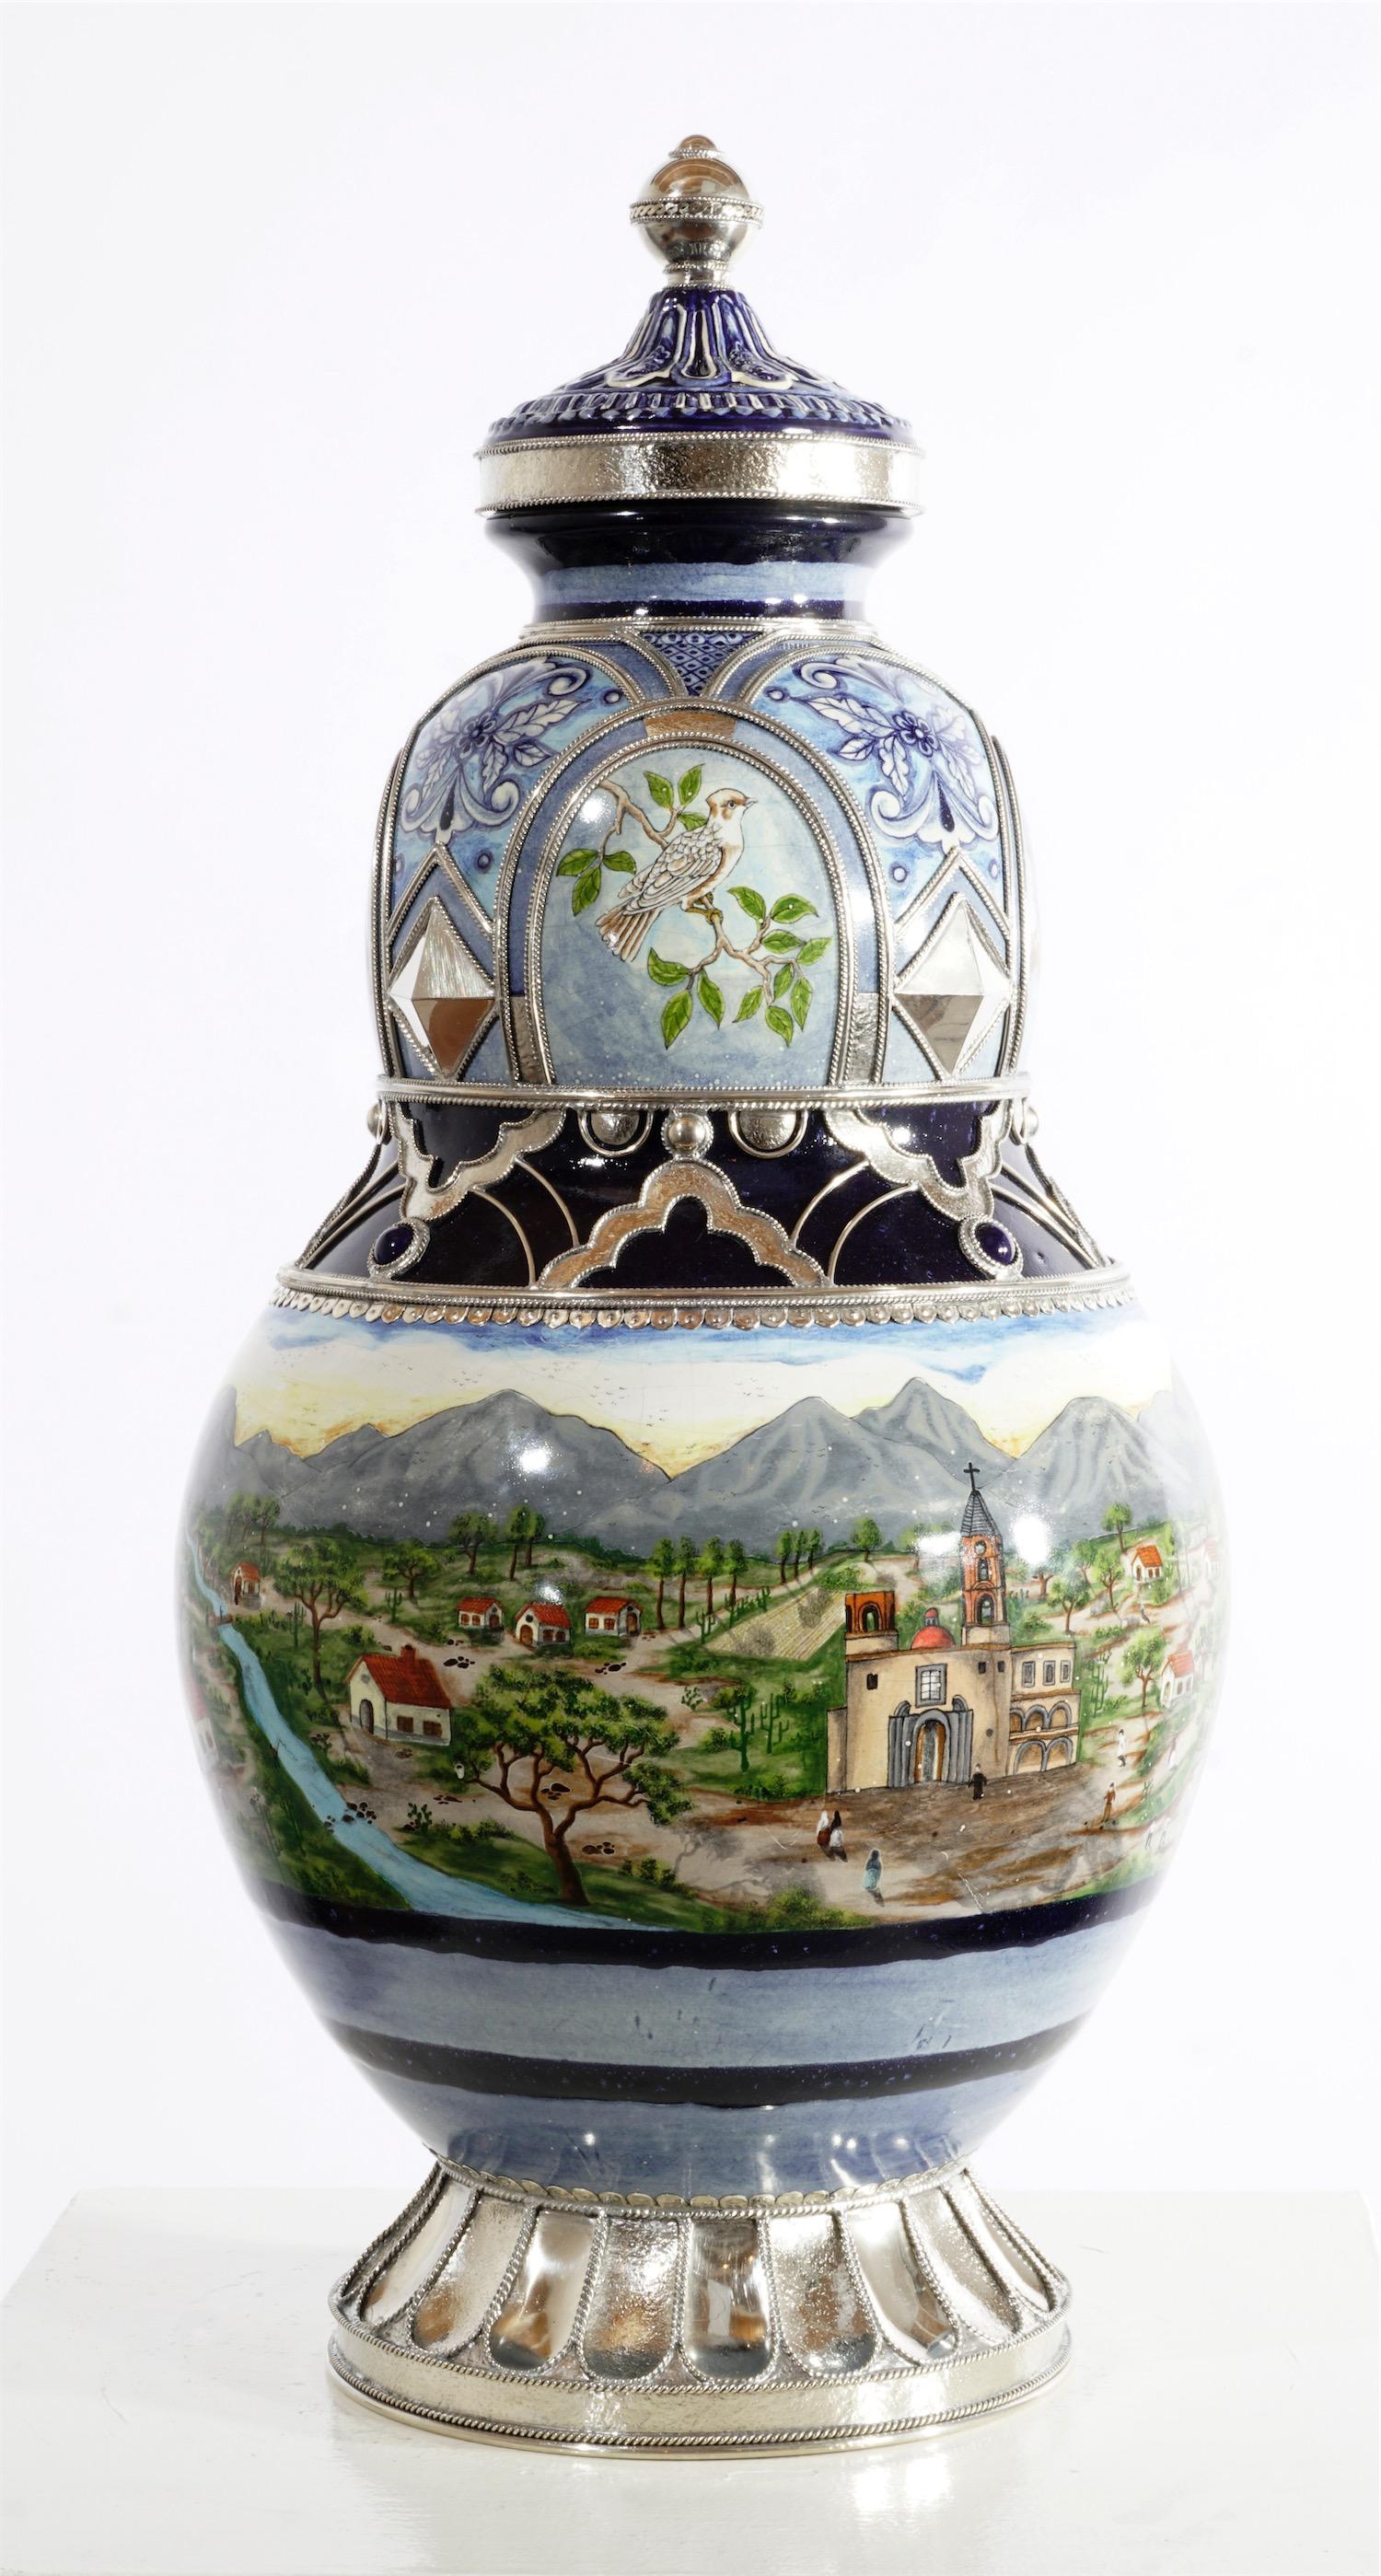 Glazed Mexican Landscape Jar Ceramic and White Metal ‘Alpaca’, One of a Kind